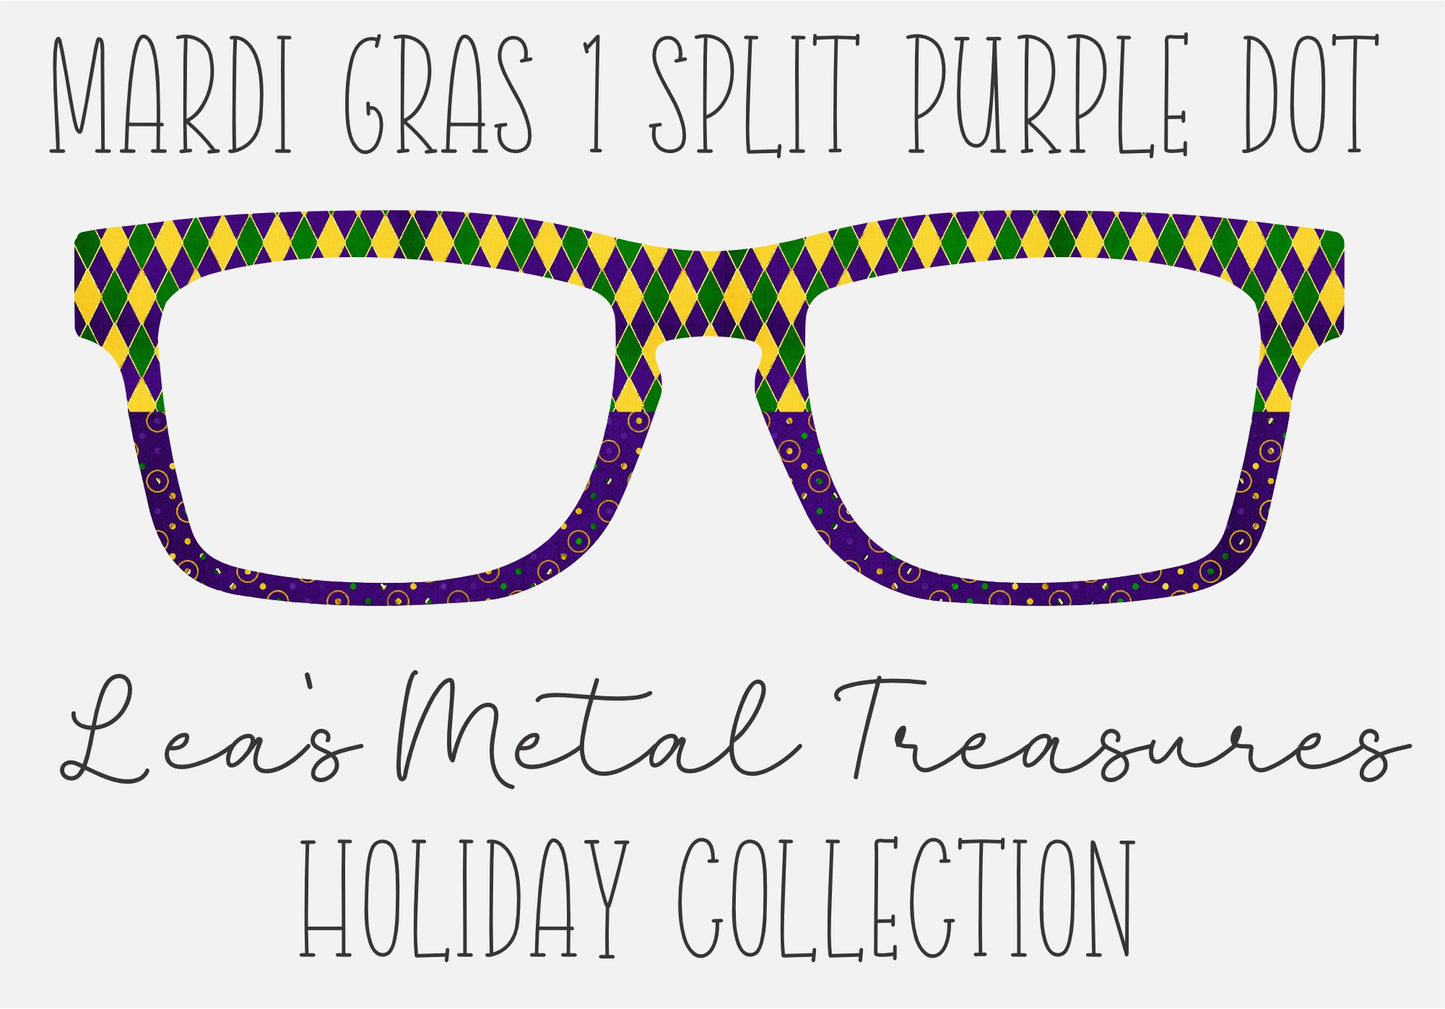 MARDI GRAS SPLIT 1 PURPLE DOT Eyewear Frame Toppers COMES WITH MAGNETS